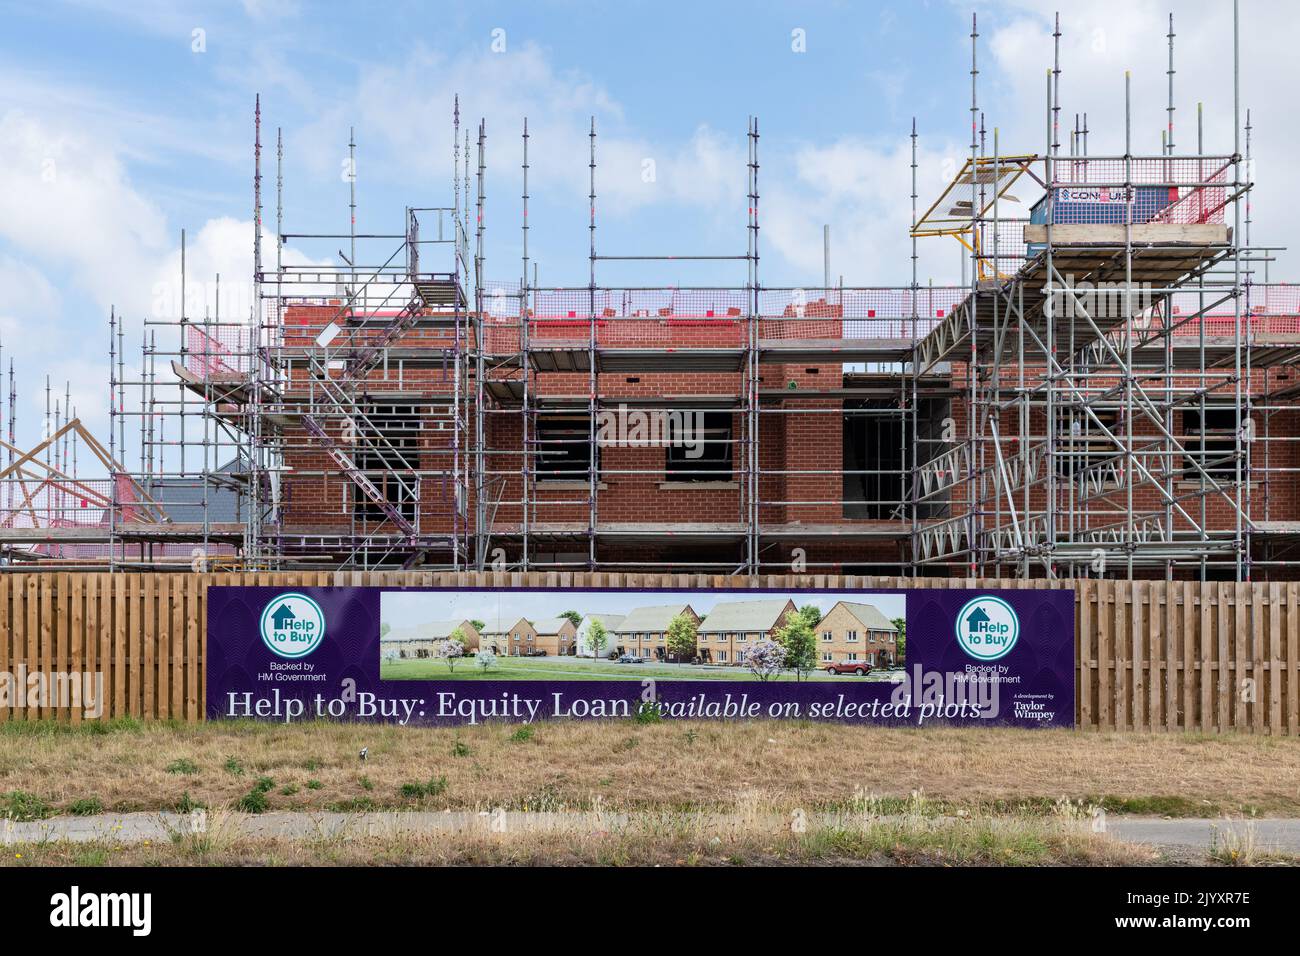 Help to Buy Equity Loan advertising on Taylor Wimpey building site - England, UK Stock Photo